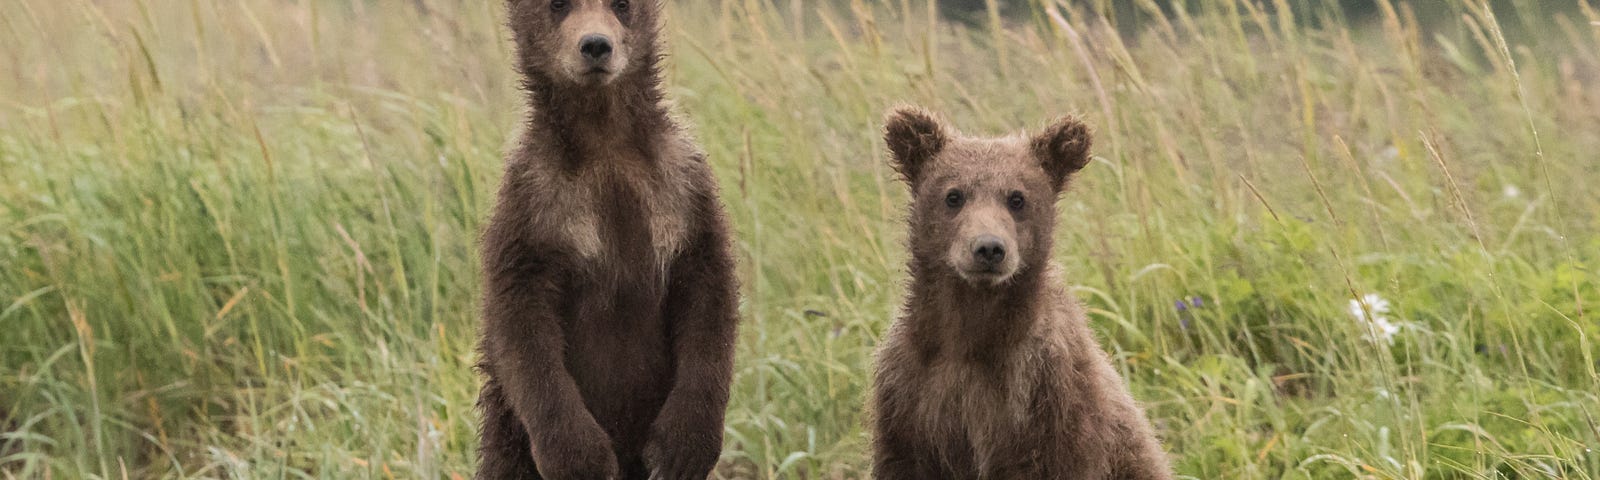 Two young bears look at the camera